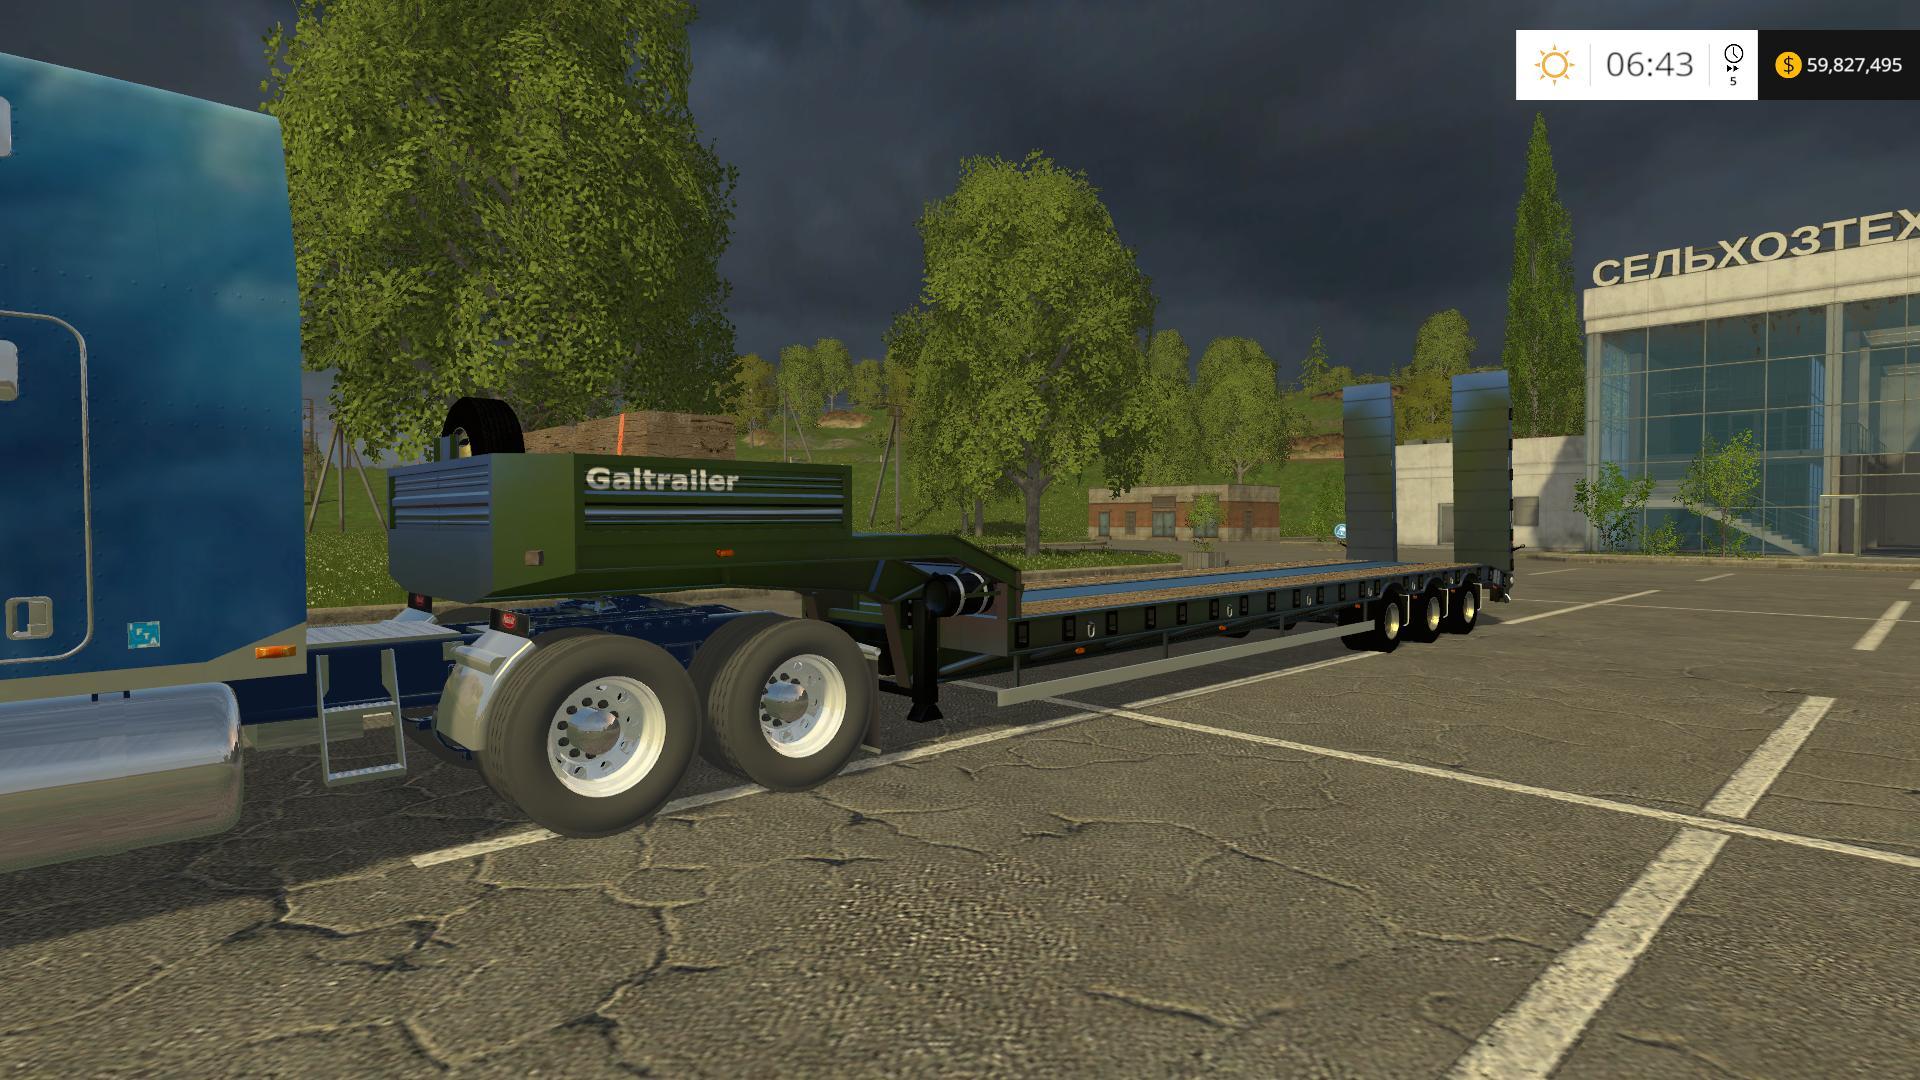 1455483294_gale-trailer-low-loader-2-0-direct-dowload-from-mod-hub_1